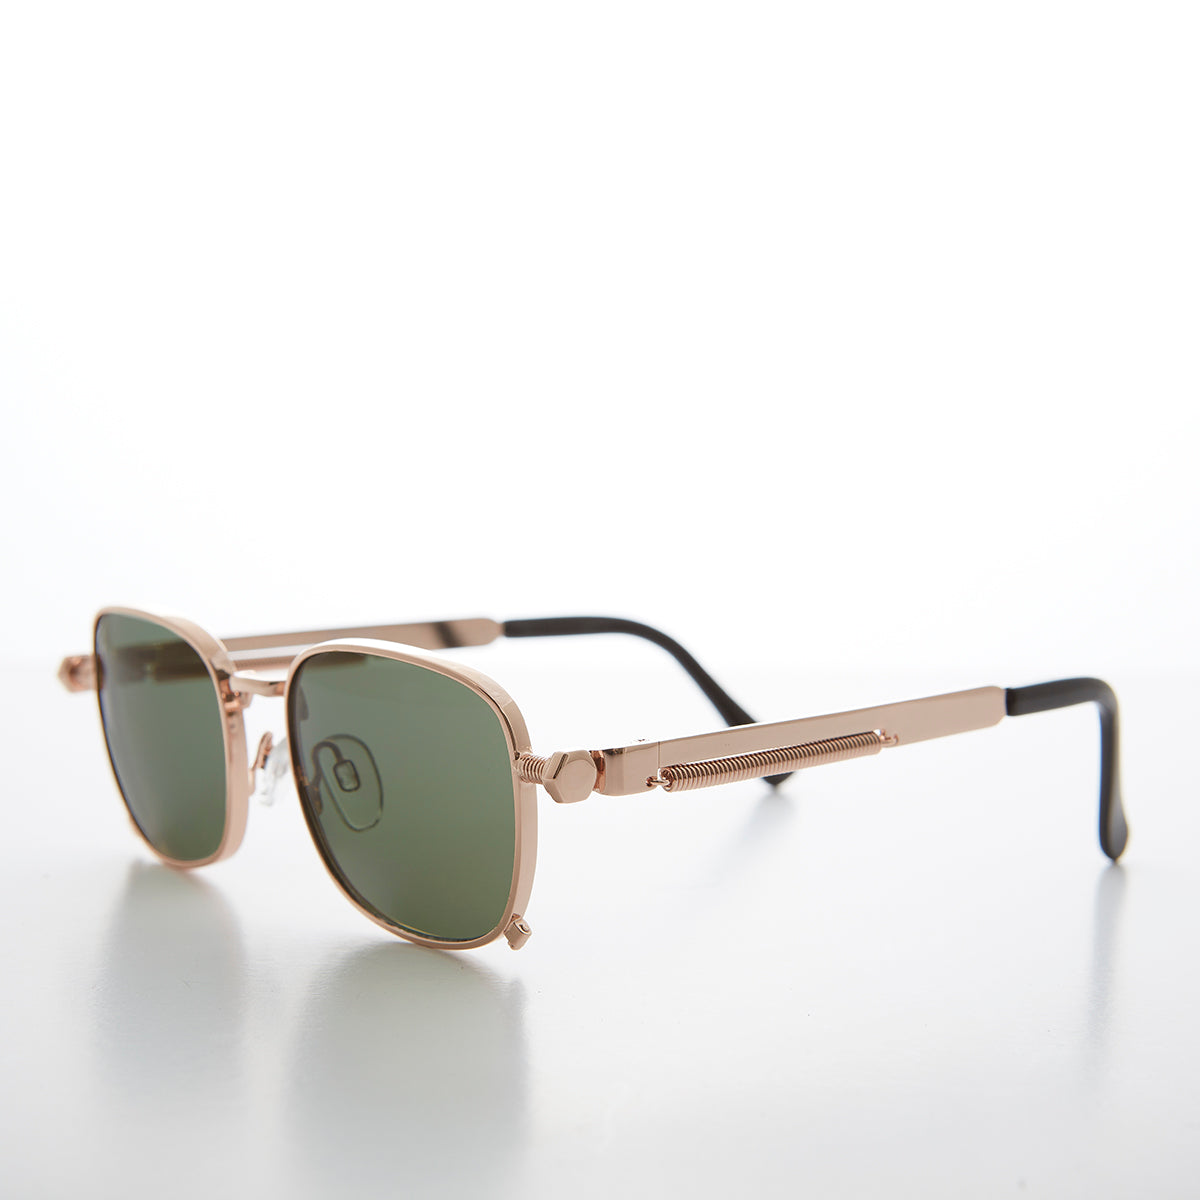 Tailored Steampunk Gold Sunglass with Industrial Temples - Tyga 1